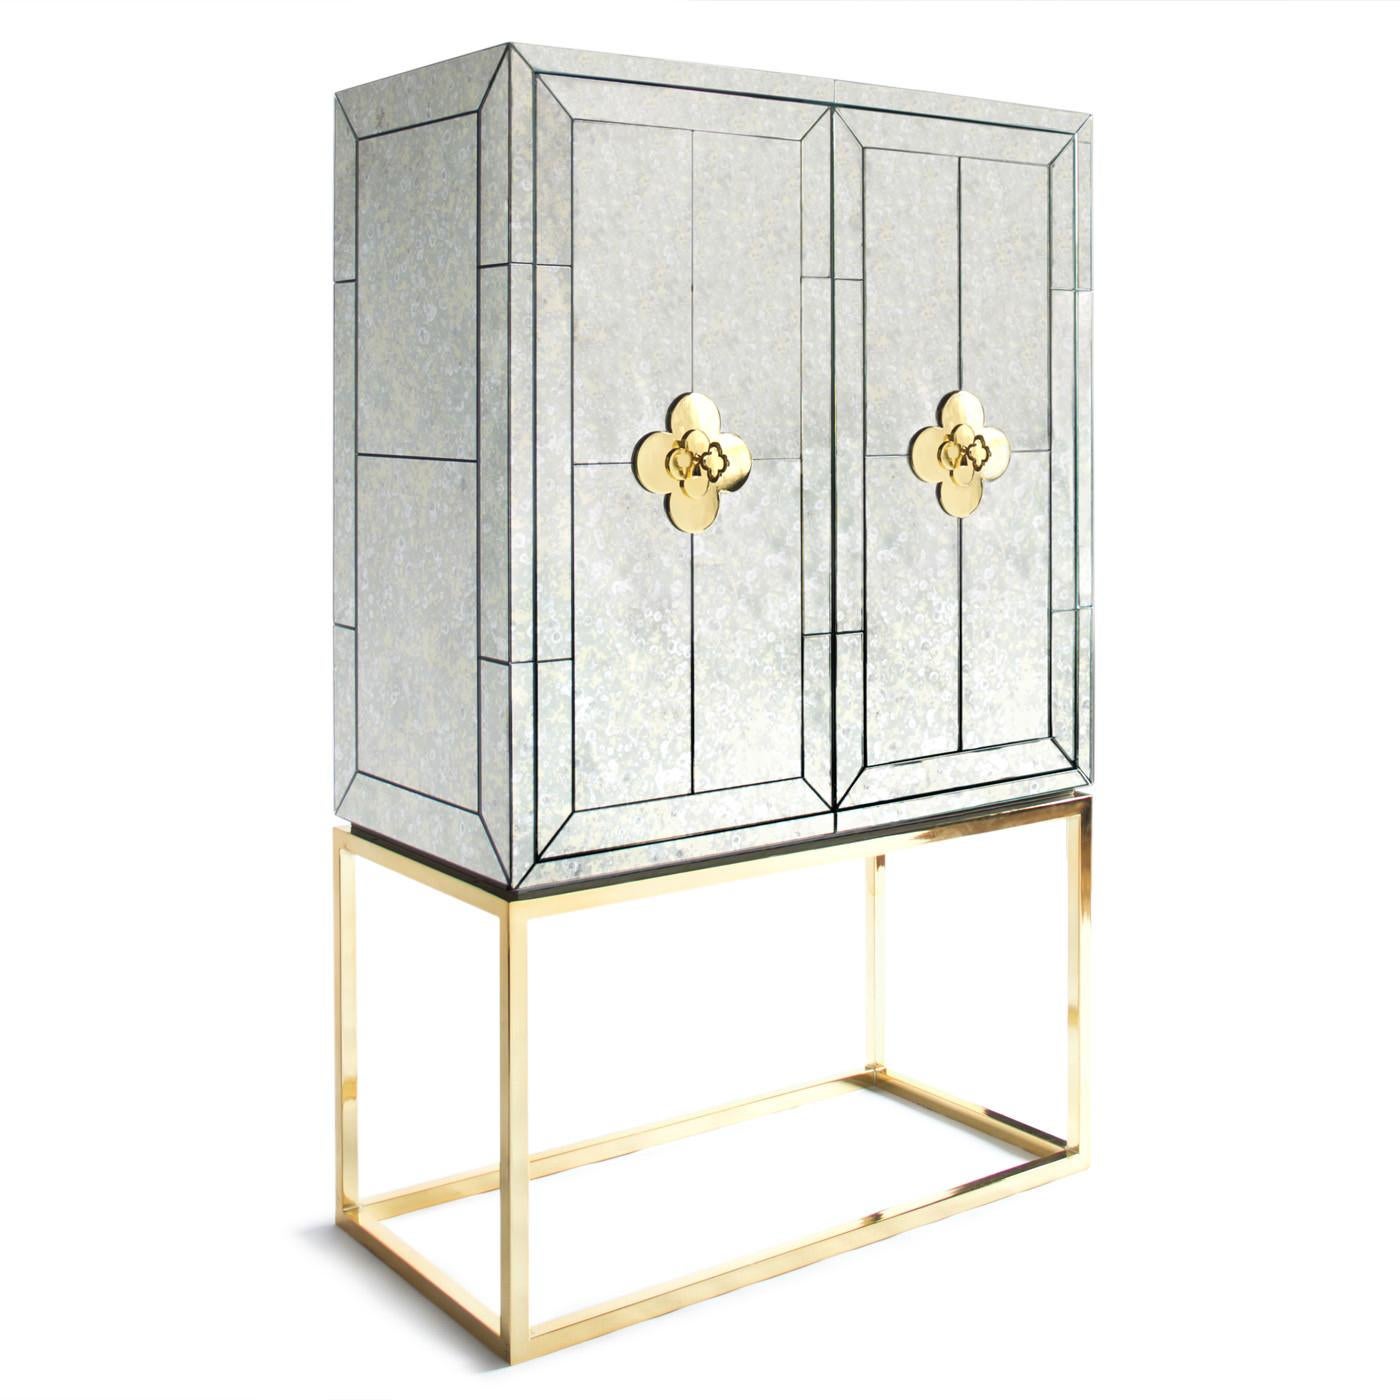 Reflectology. Minimalist forms meet Maximalist glamour. Antiqued mirror with a polished brass base. The robin's egg blue interior is fitted with four adjustable tempered glass shelves, plus six wire-bound drinking glass shelves inside the doors. Two